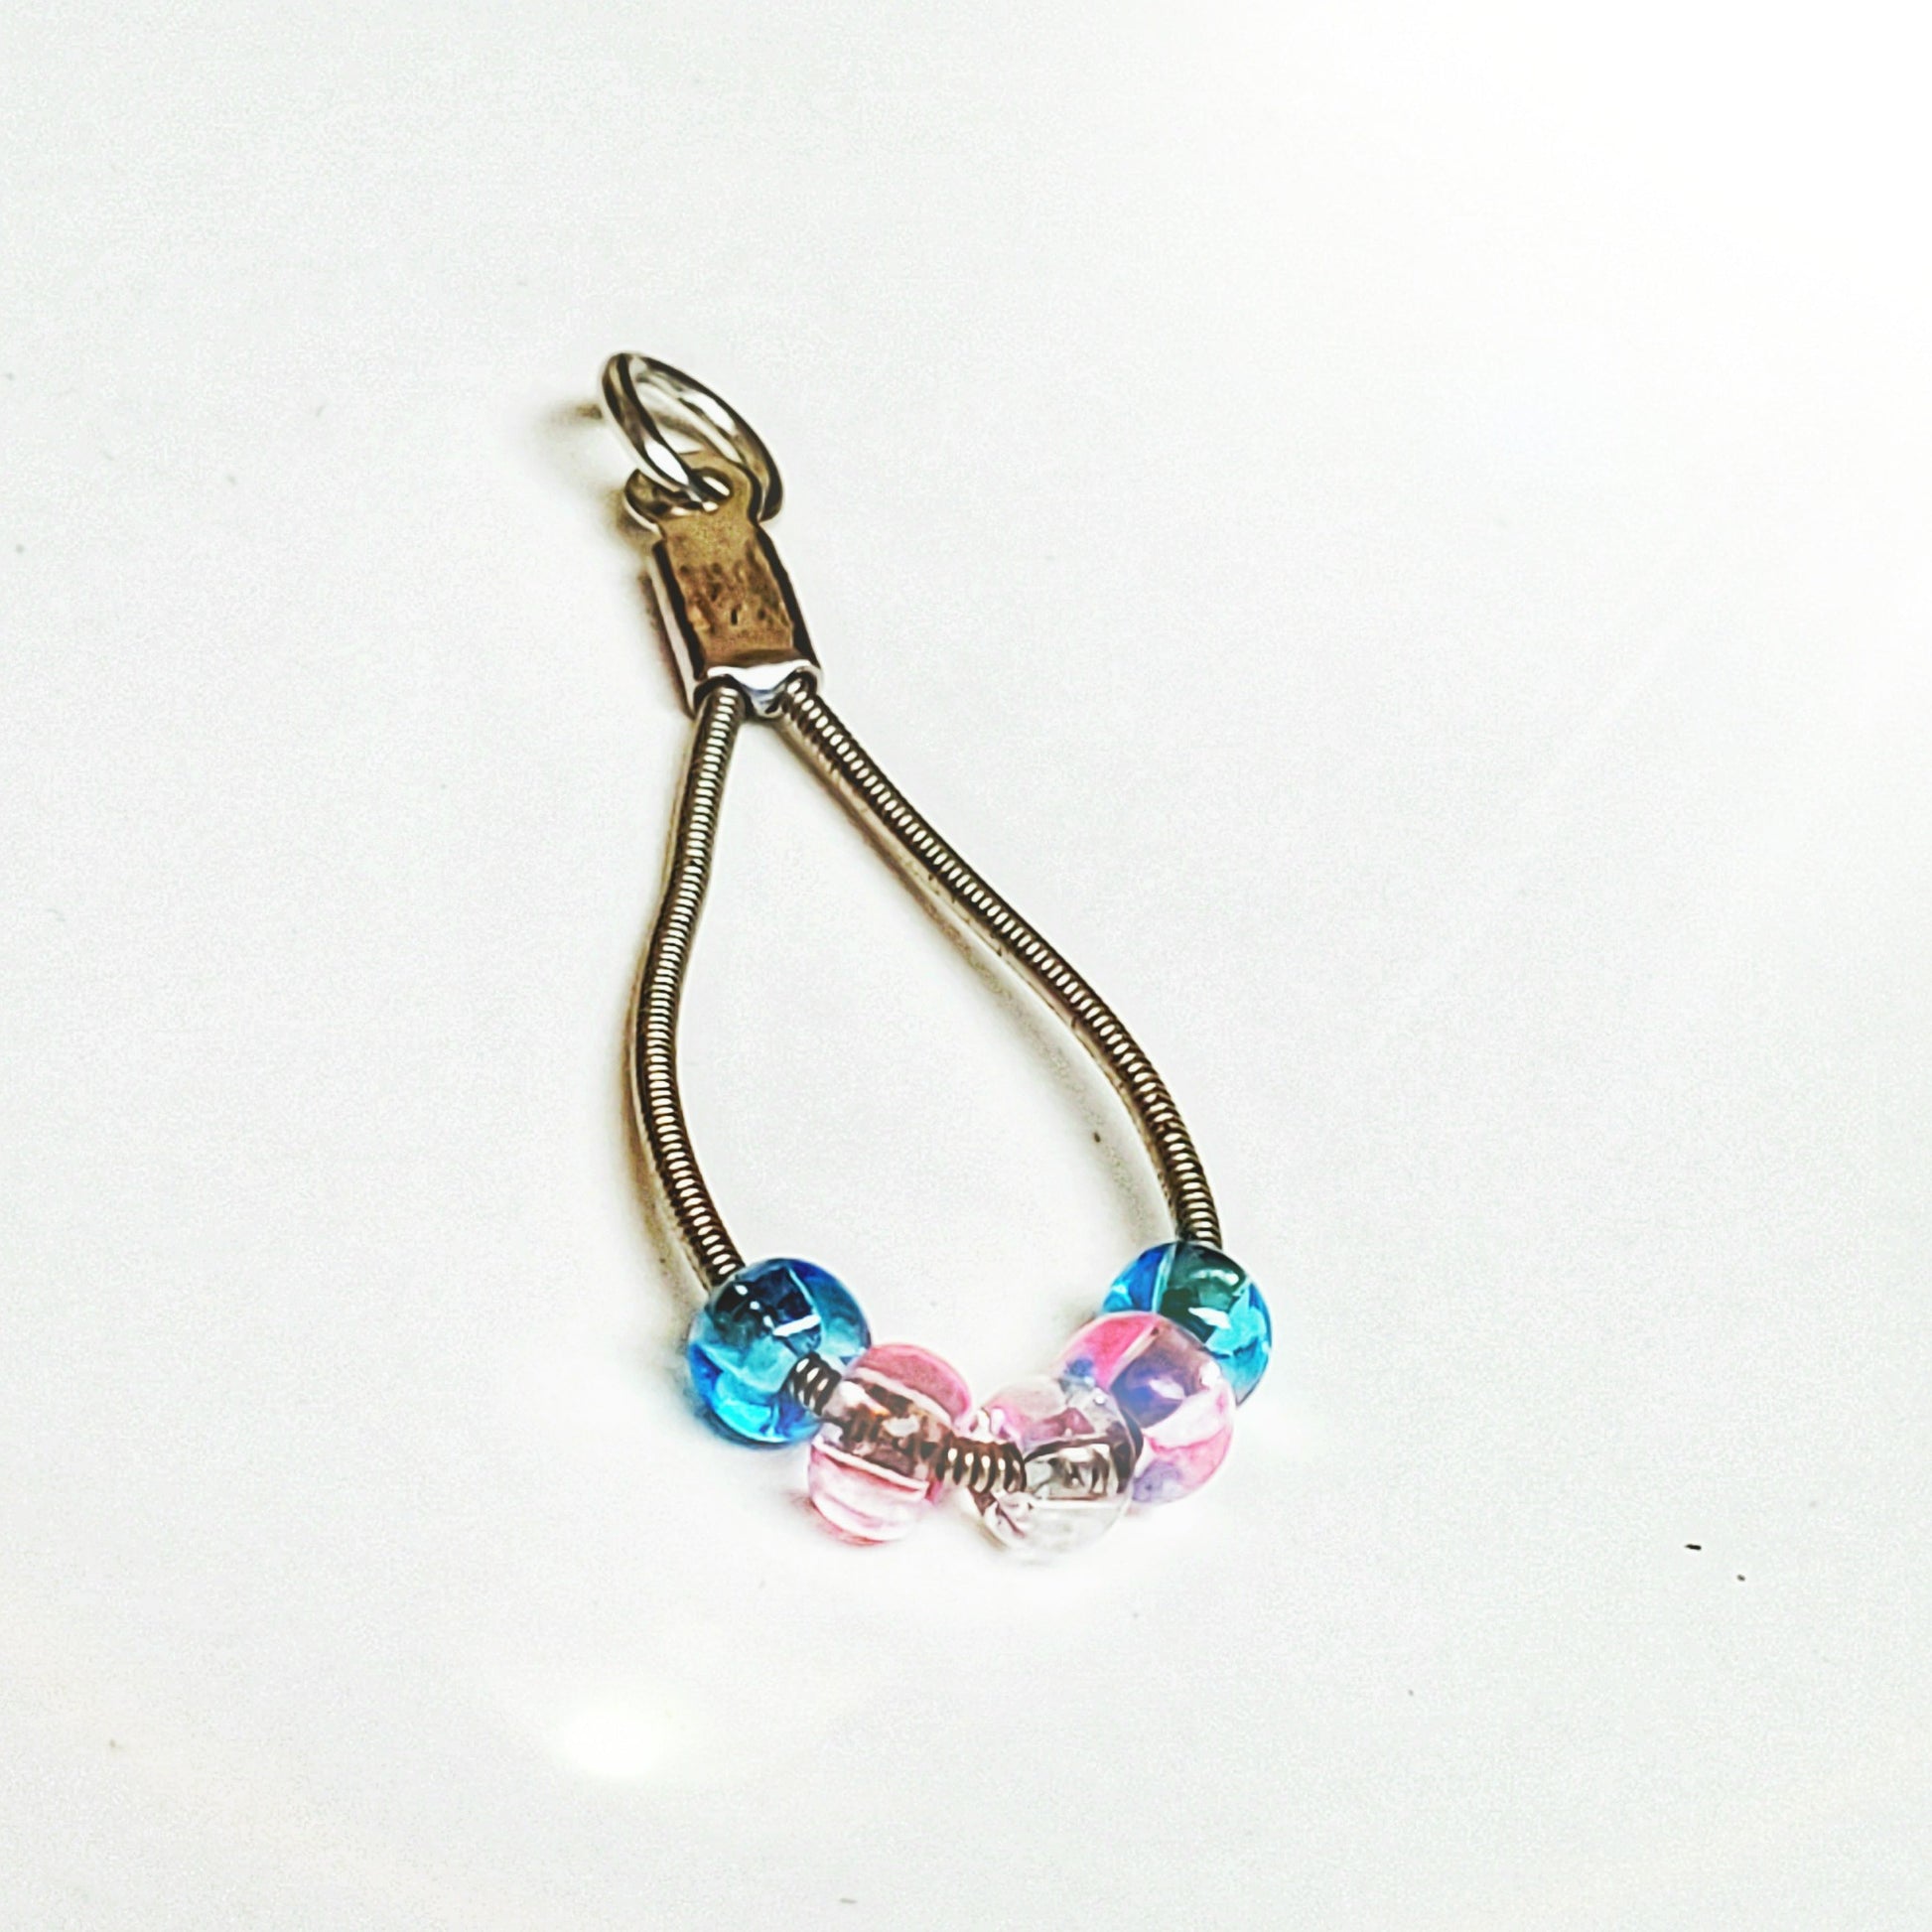 silver coloured teardrop pendant made from upcycled guitar strings - there are 5 beads representing the colours of the transgender pride flag - 2 blue, 2 pink and 1 white - white background